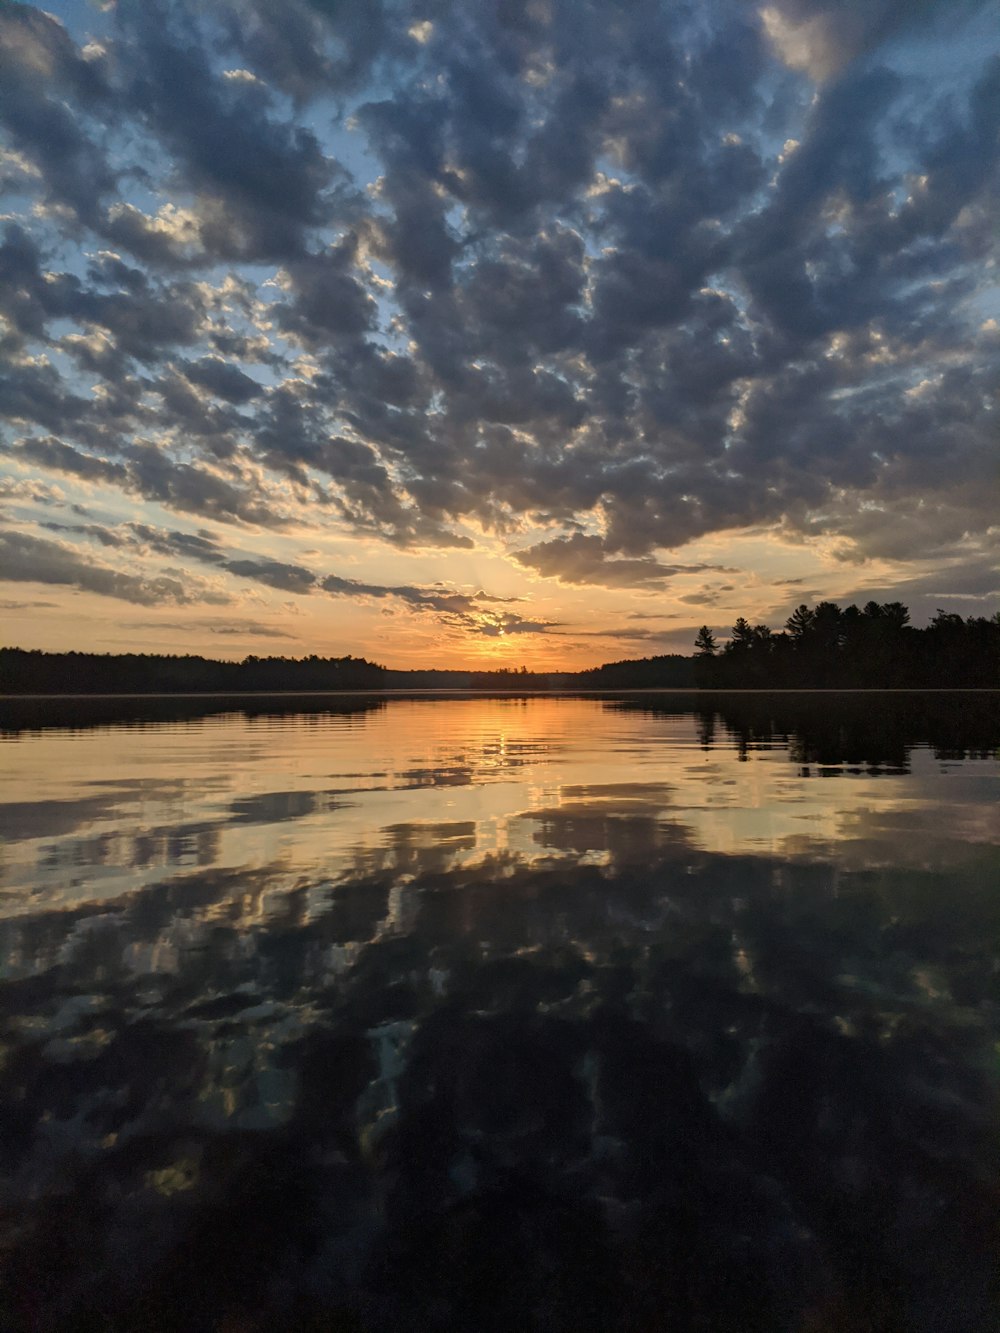 body of water under blue sky during sunset